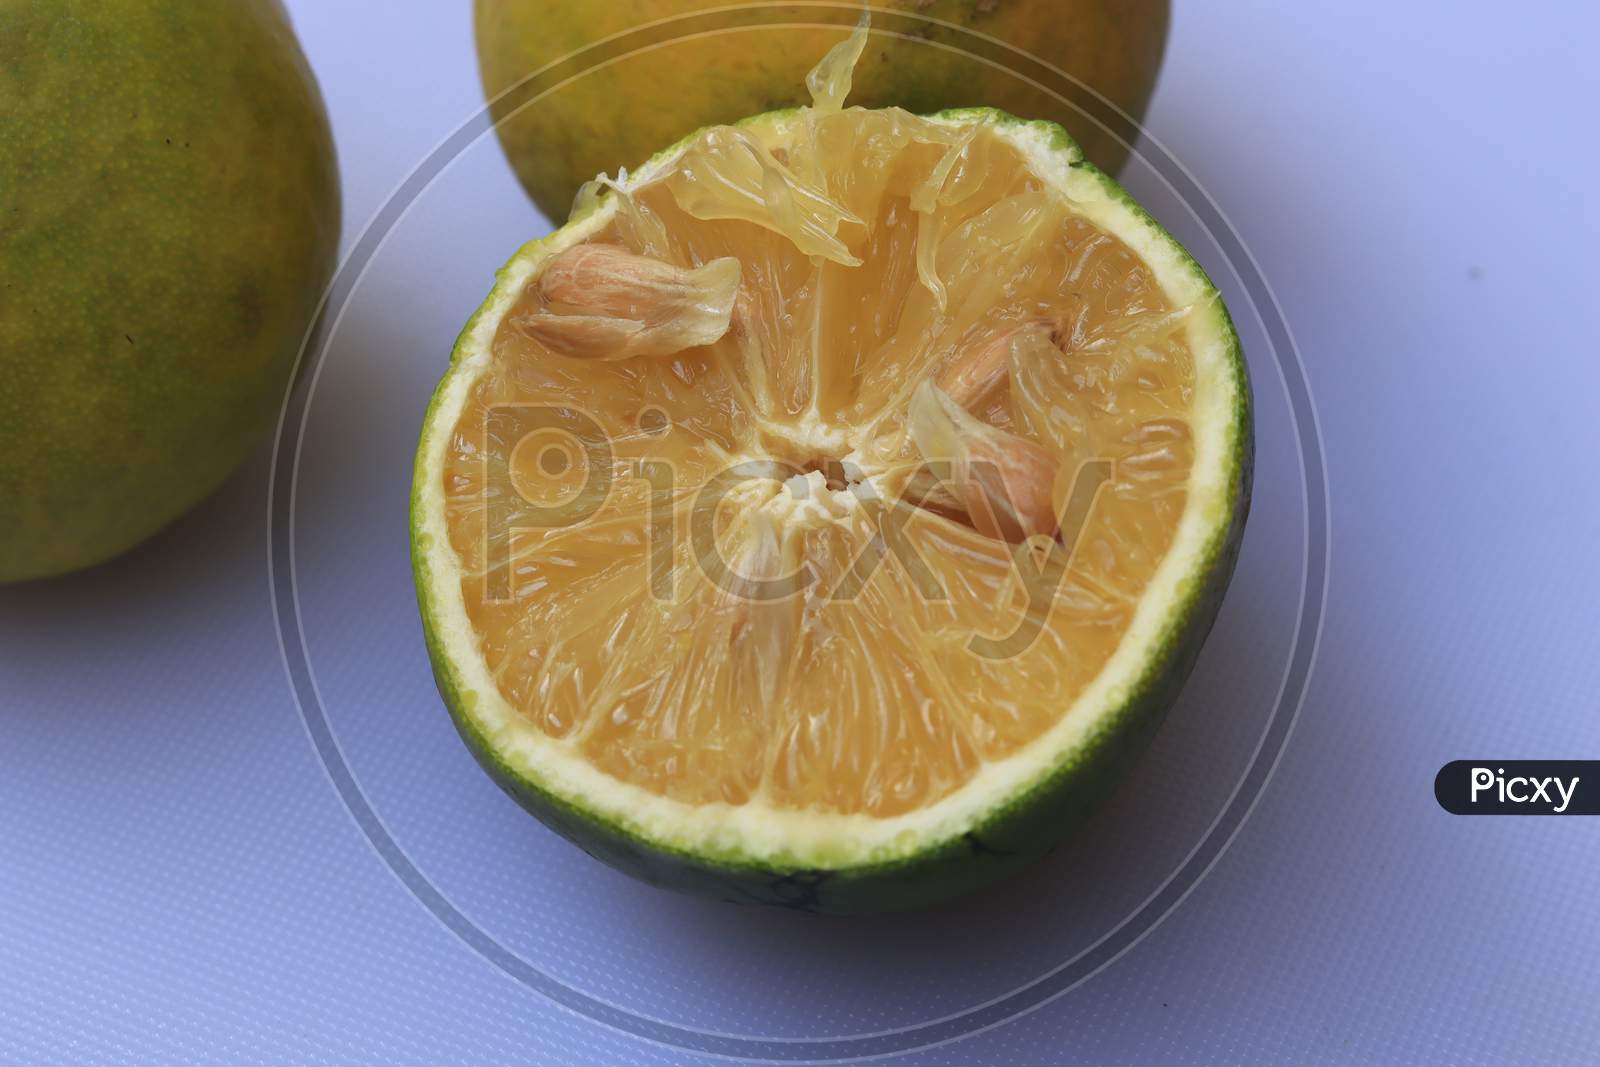 Yellow and green color whole ripe Sweet lime fruits or Citrus limetta